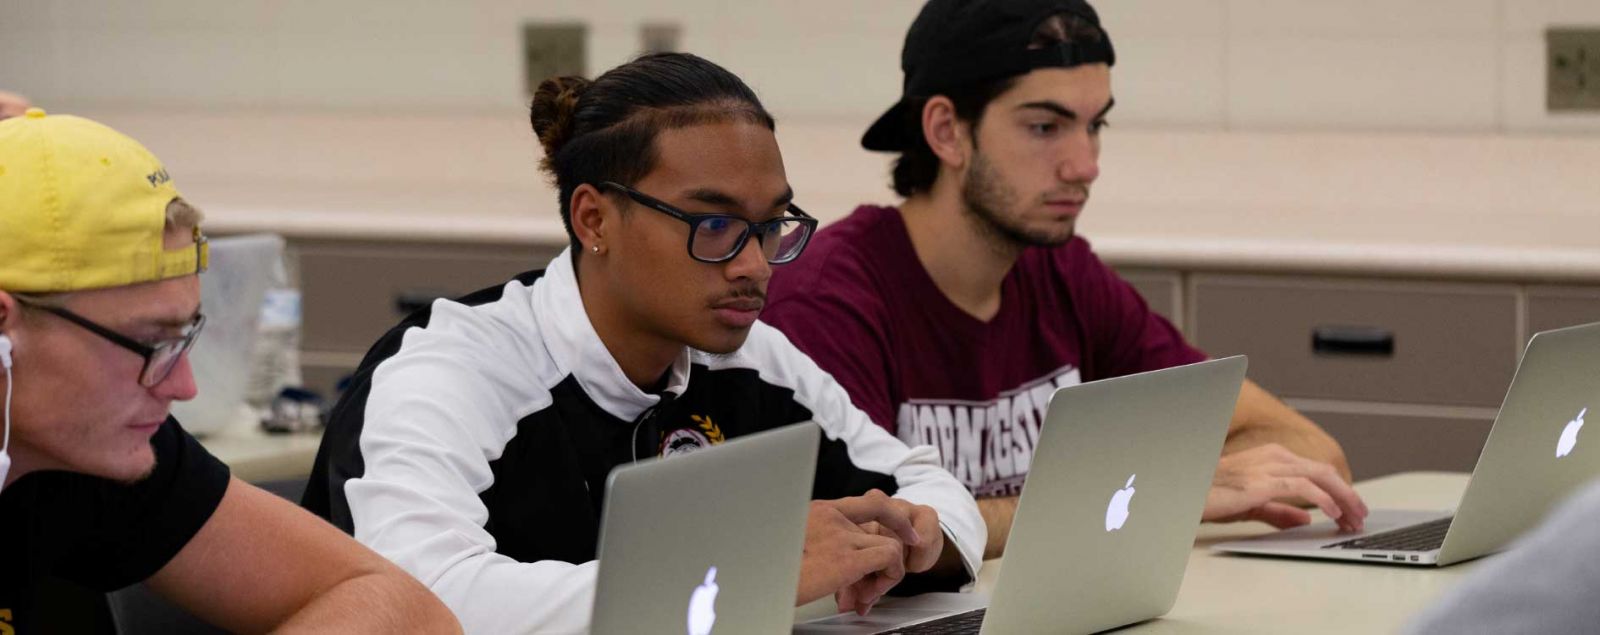 Student with Airpods on Laptop